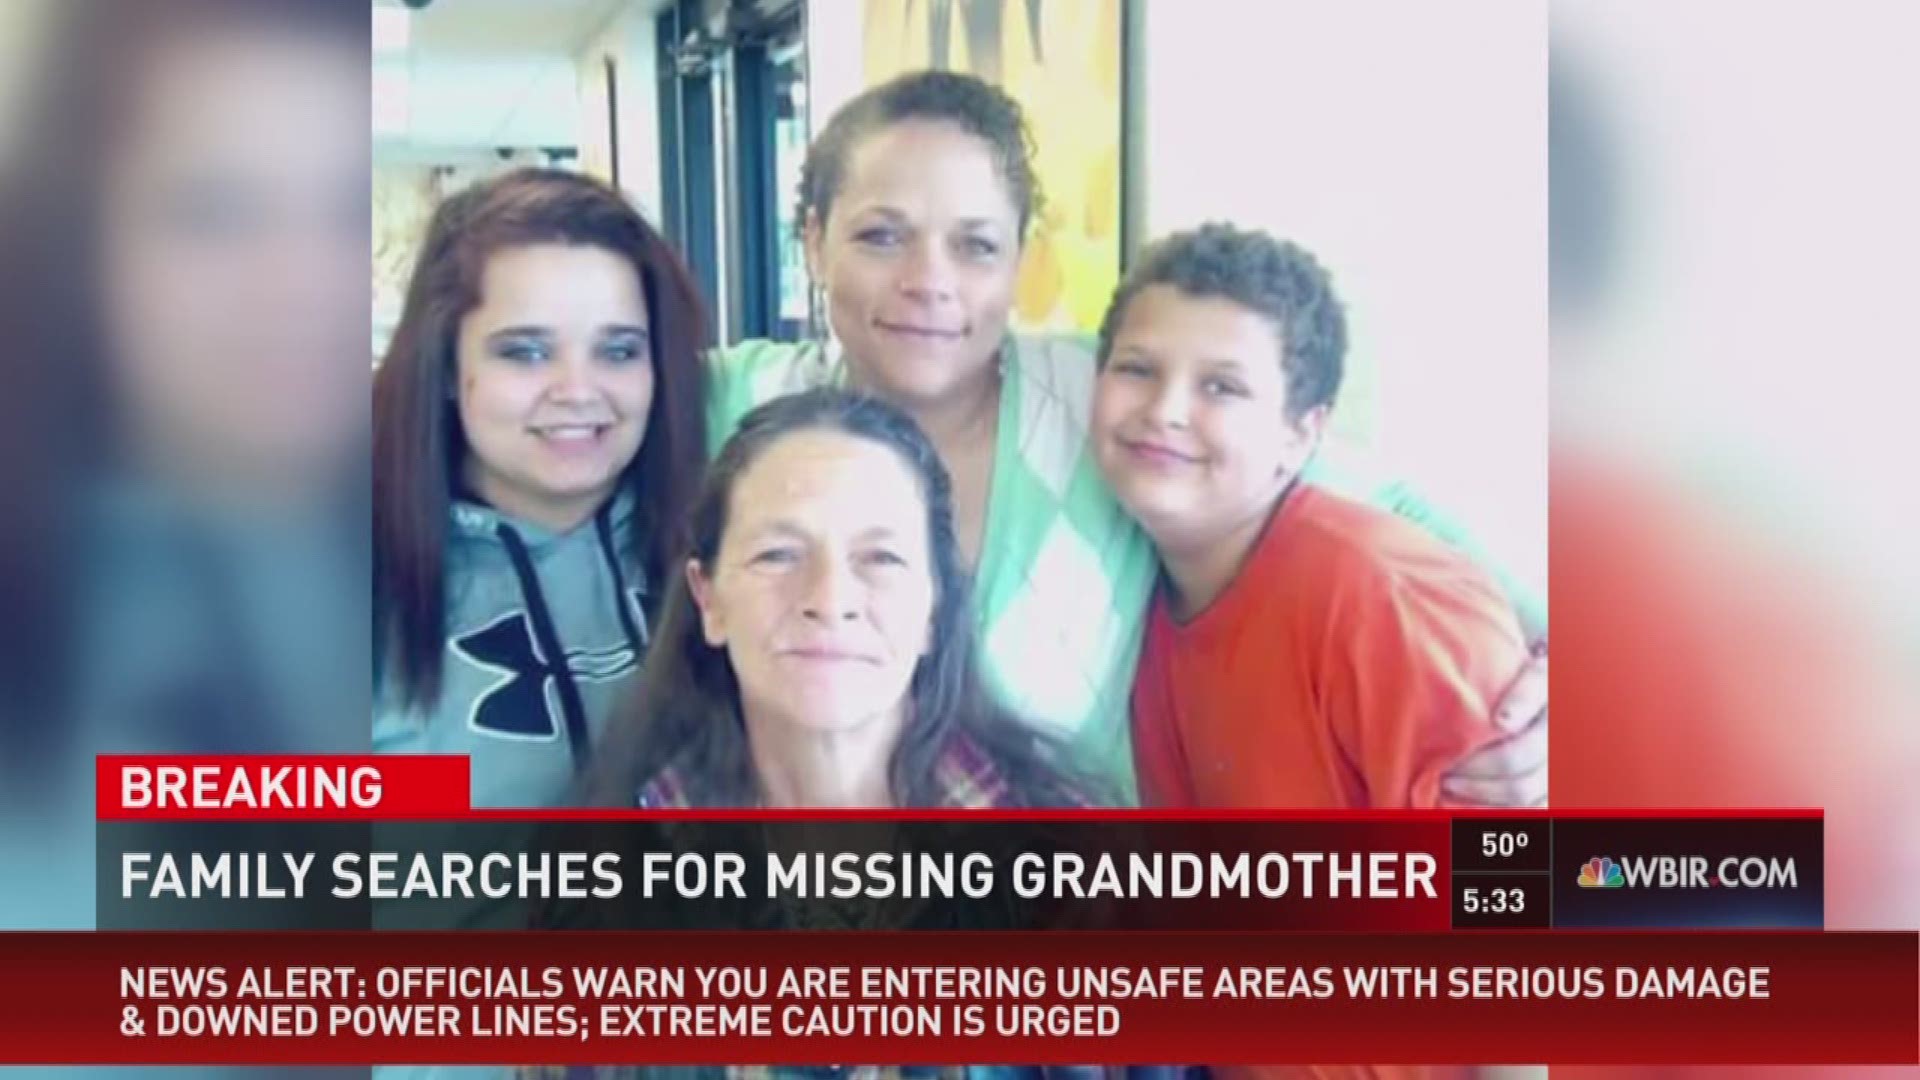 The family of Pamela Johnson is not giving up hope that they will find their missing grandmother and get many more of her famous hugs. Dec. 1, 2016.